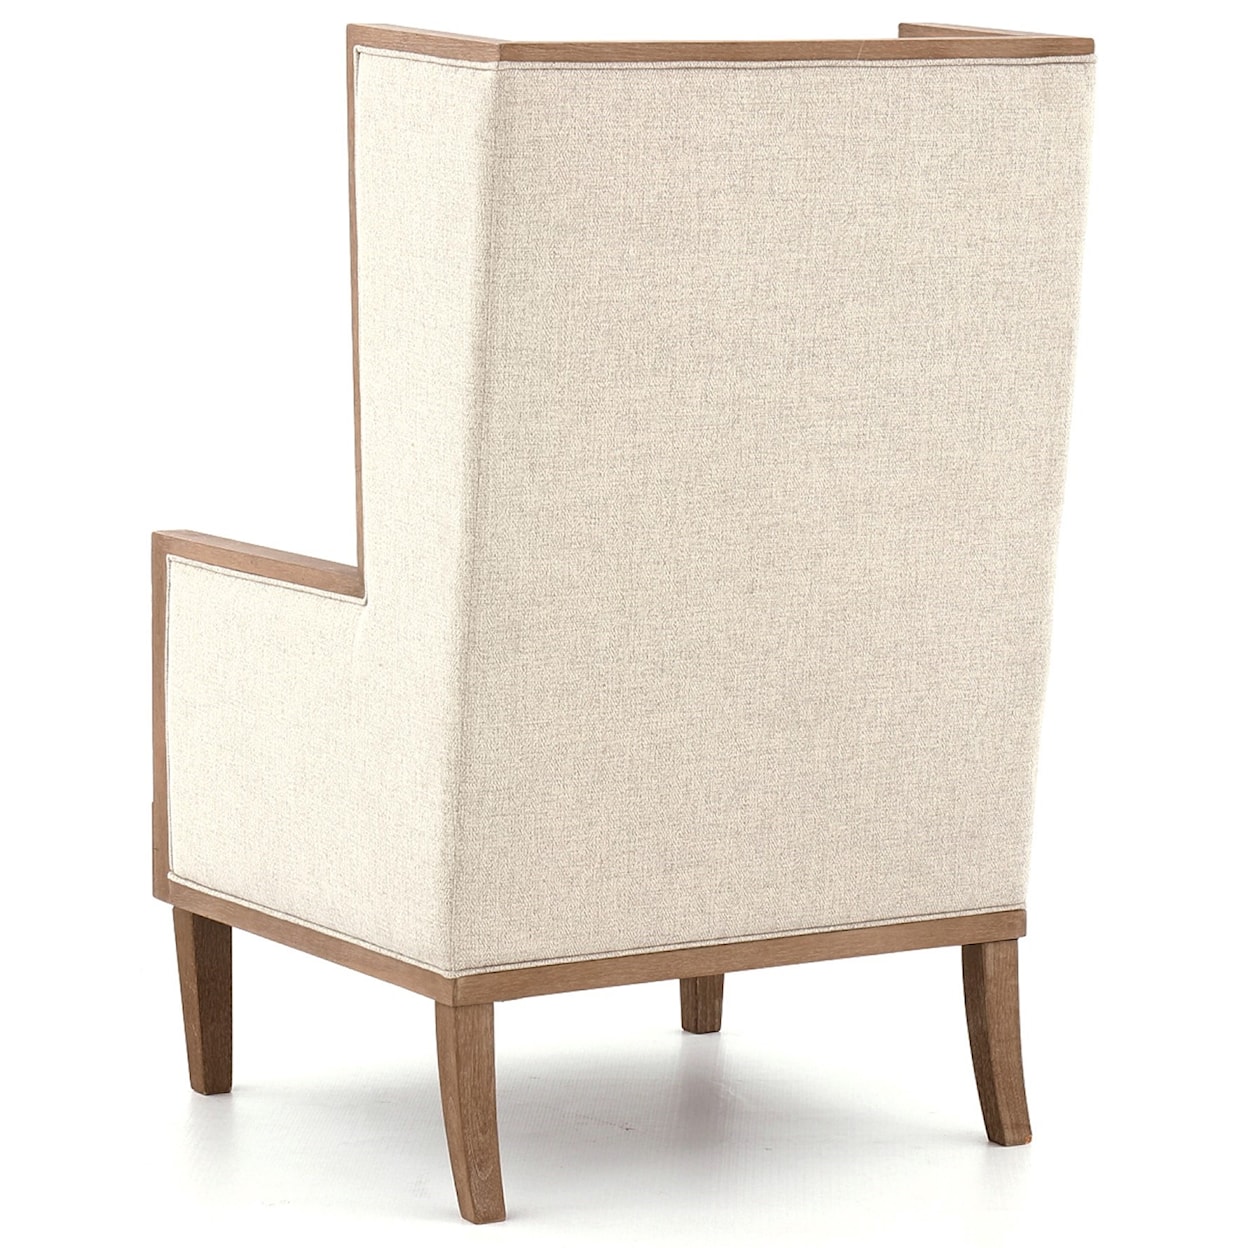 Signature Design by Ashley Furniture Avila Accent Chair